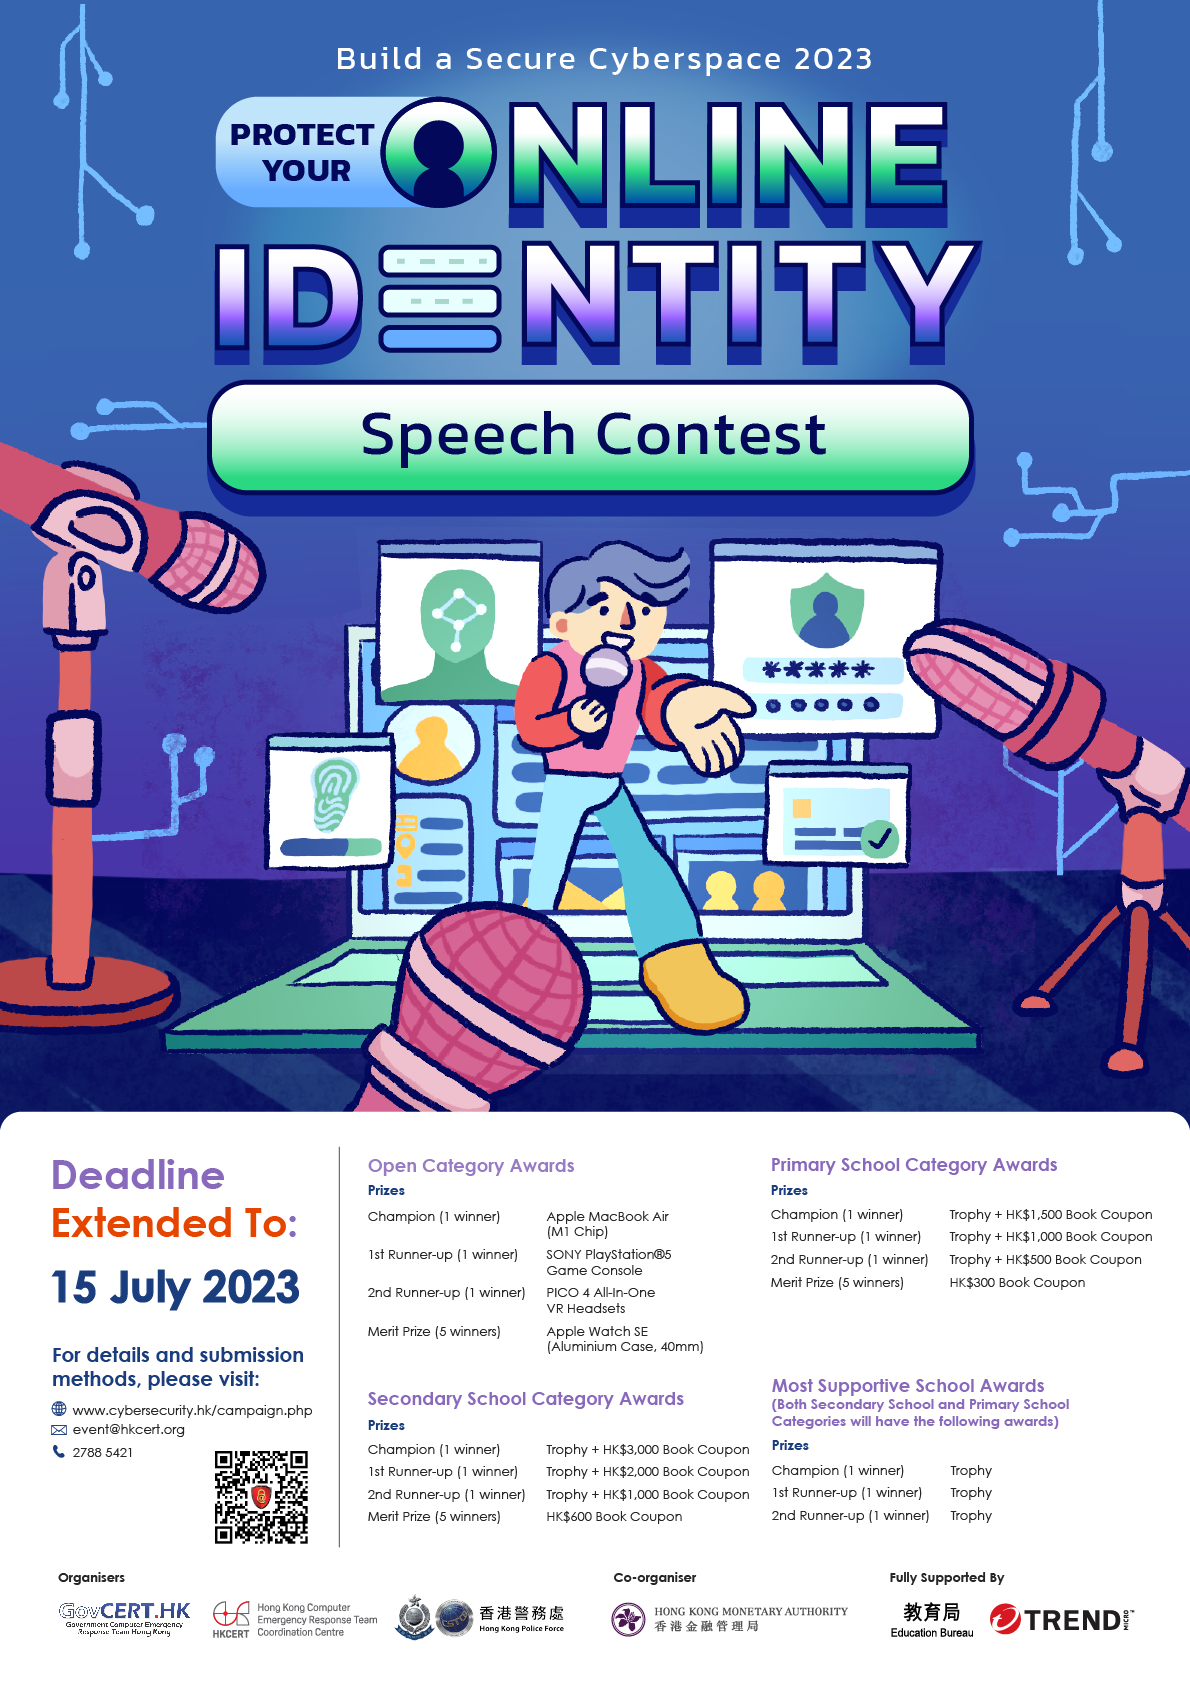 Poster of “Protect Your Online Identity” Speech Contest